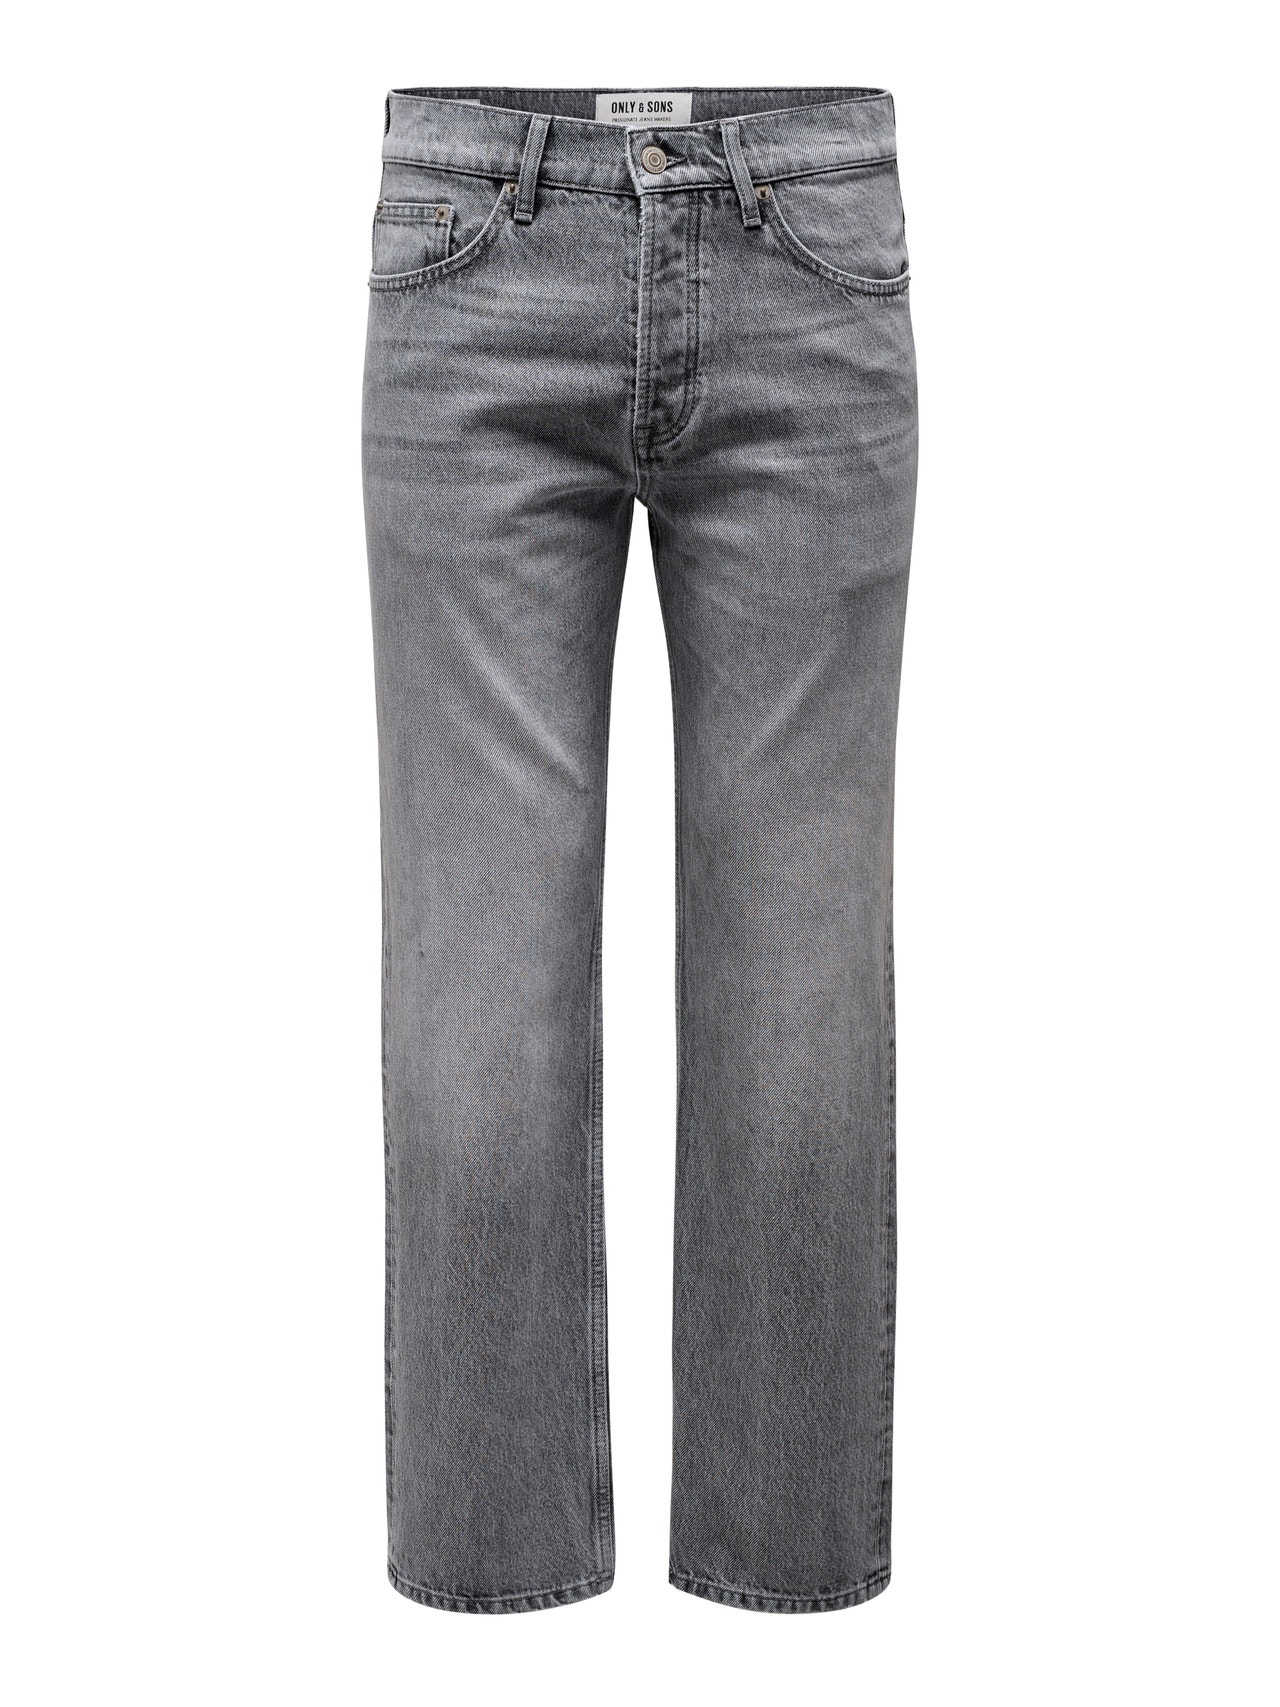 ONLY & SONS Jeans Straight Fit Taille moyenne -Medium Grey Denim - 22028202